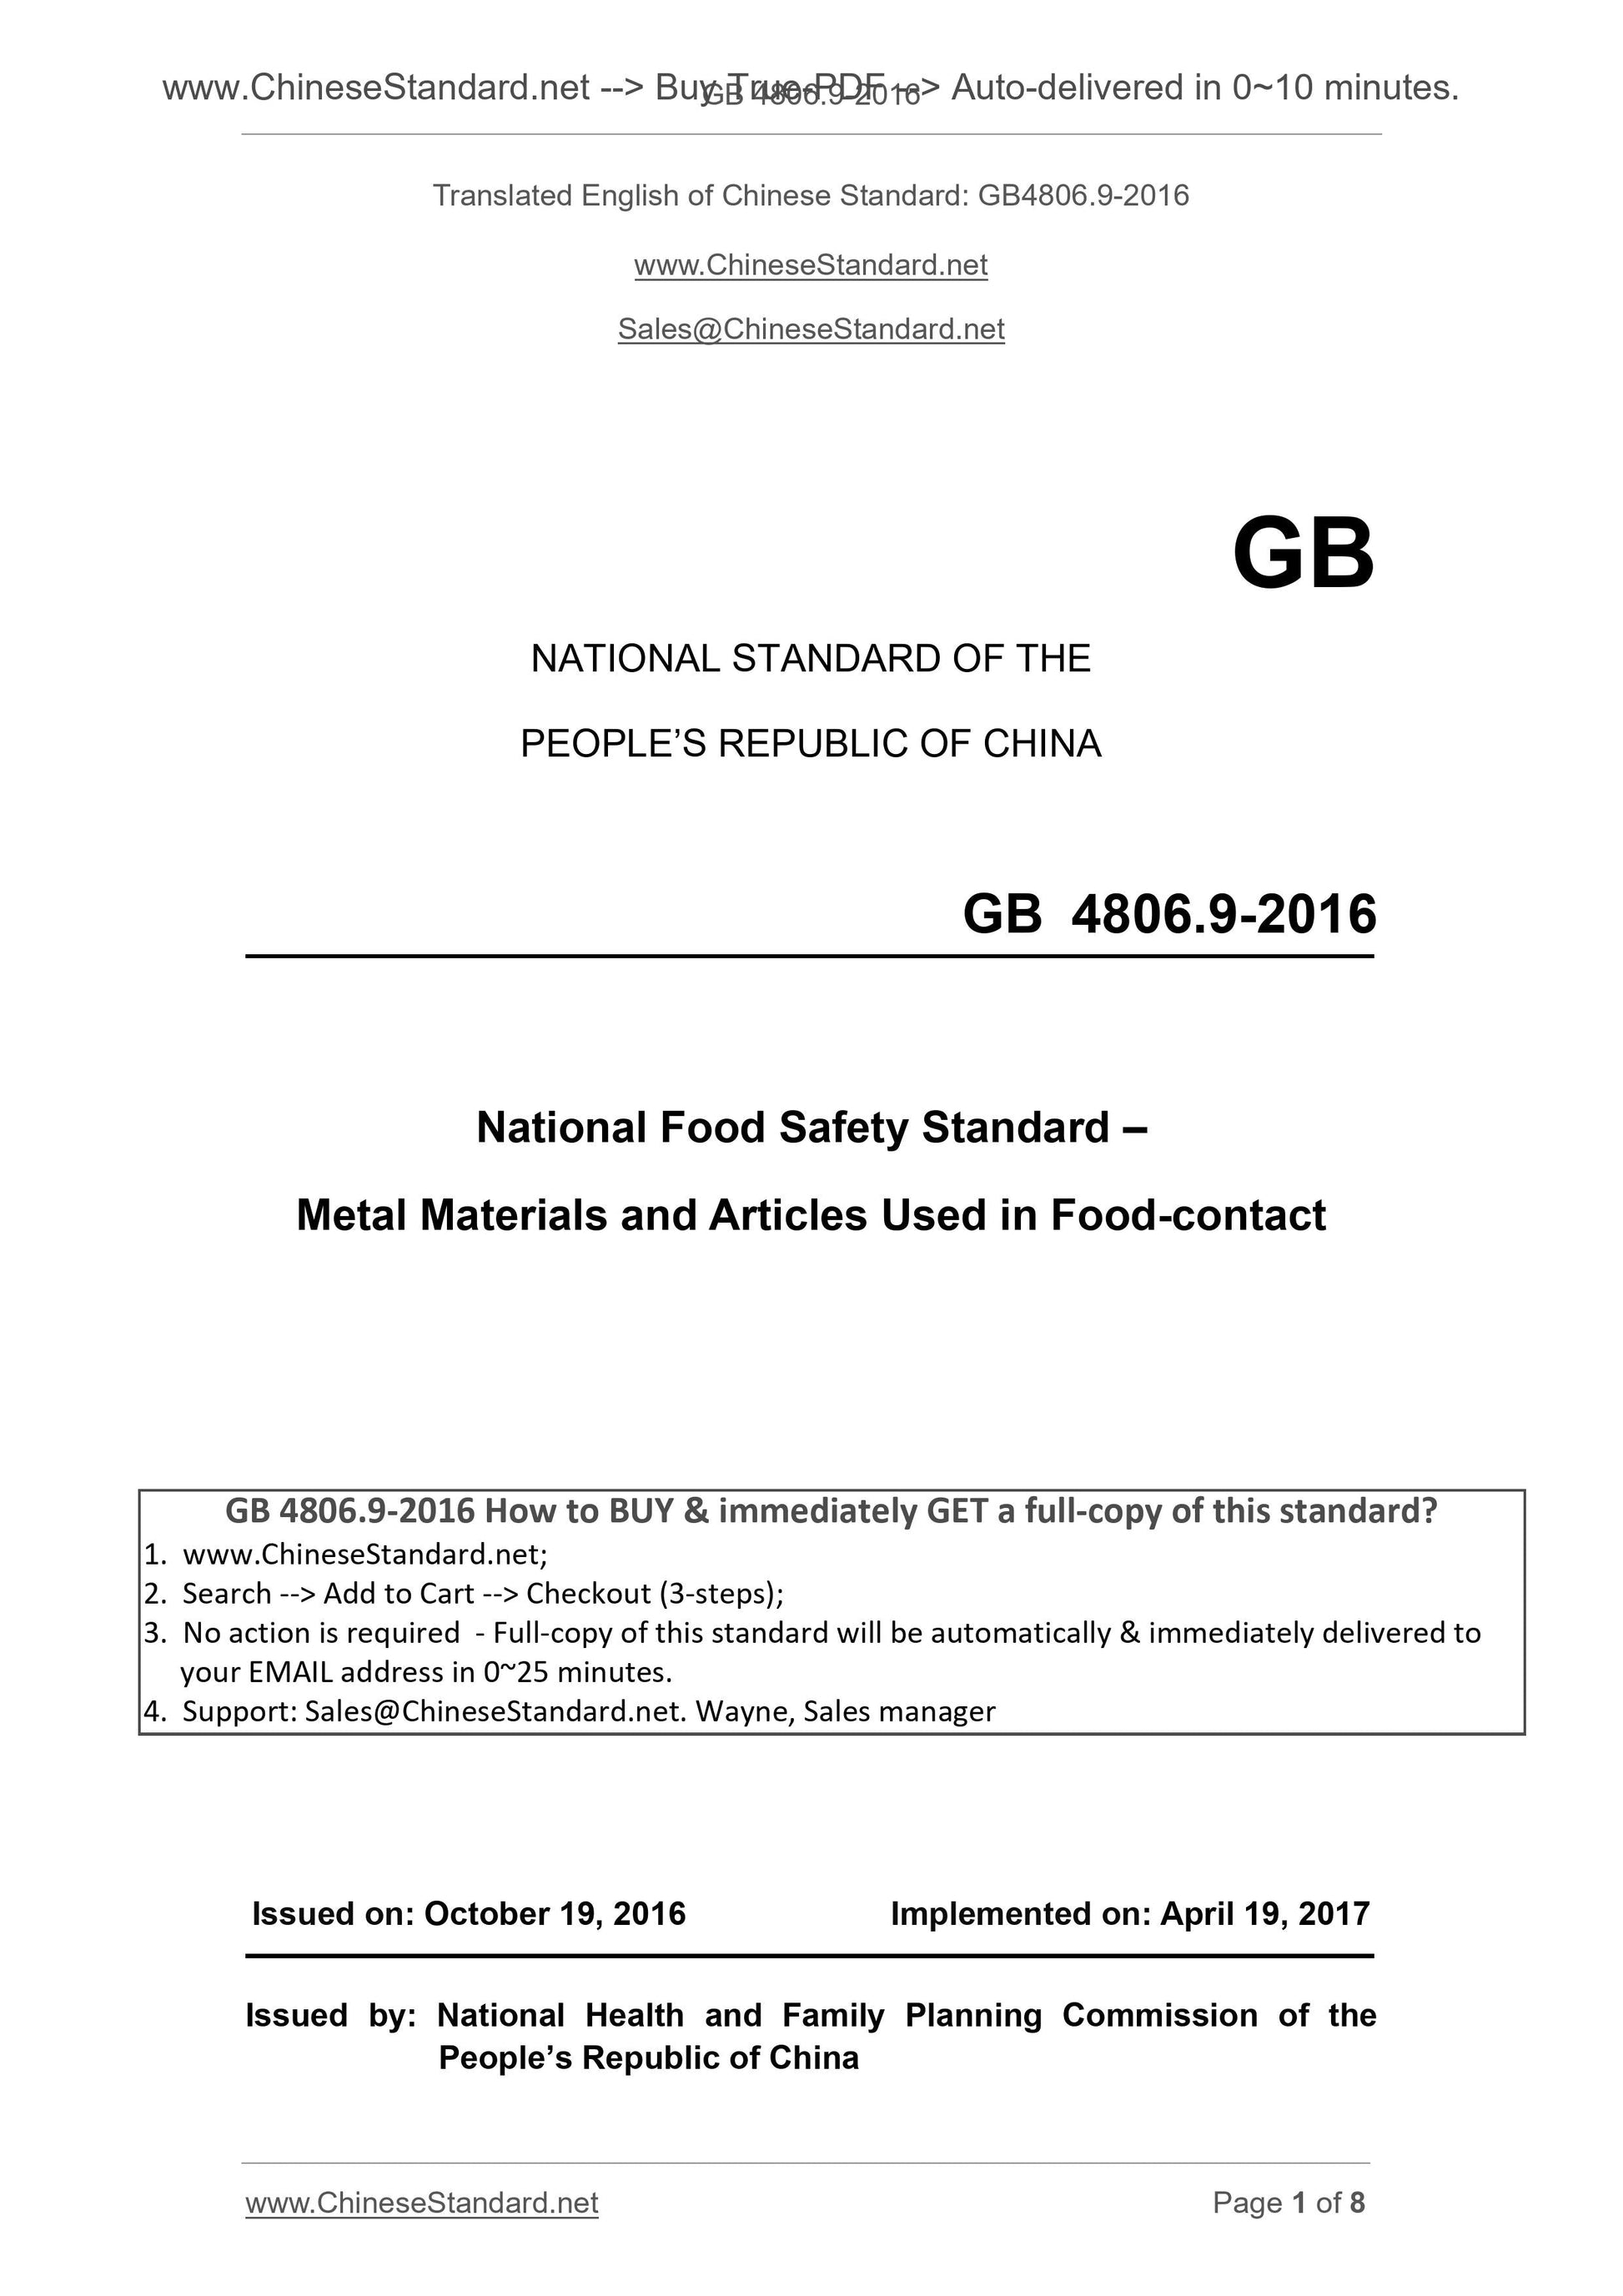 GB 4806.9-2016 Page 1